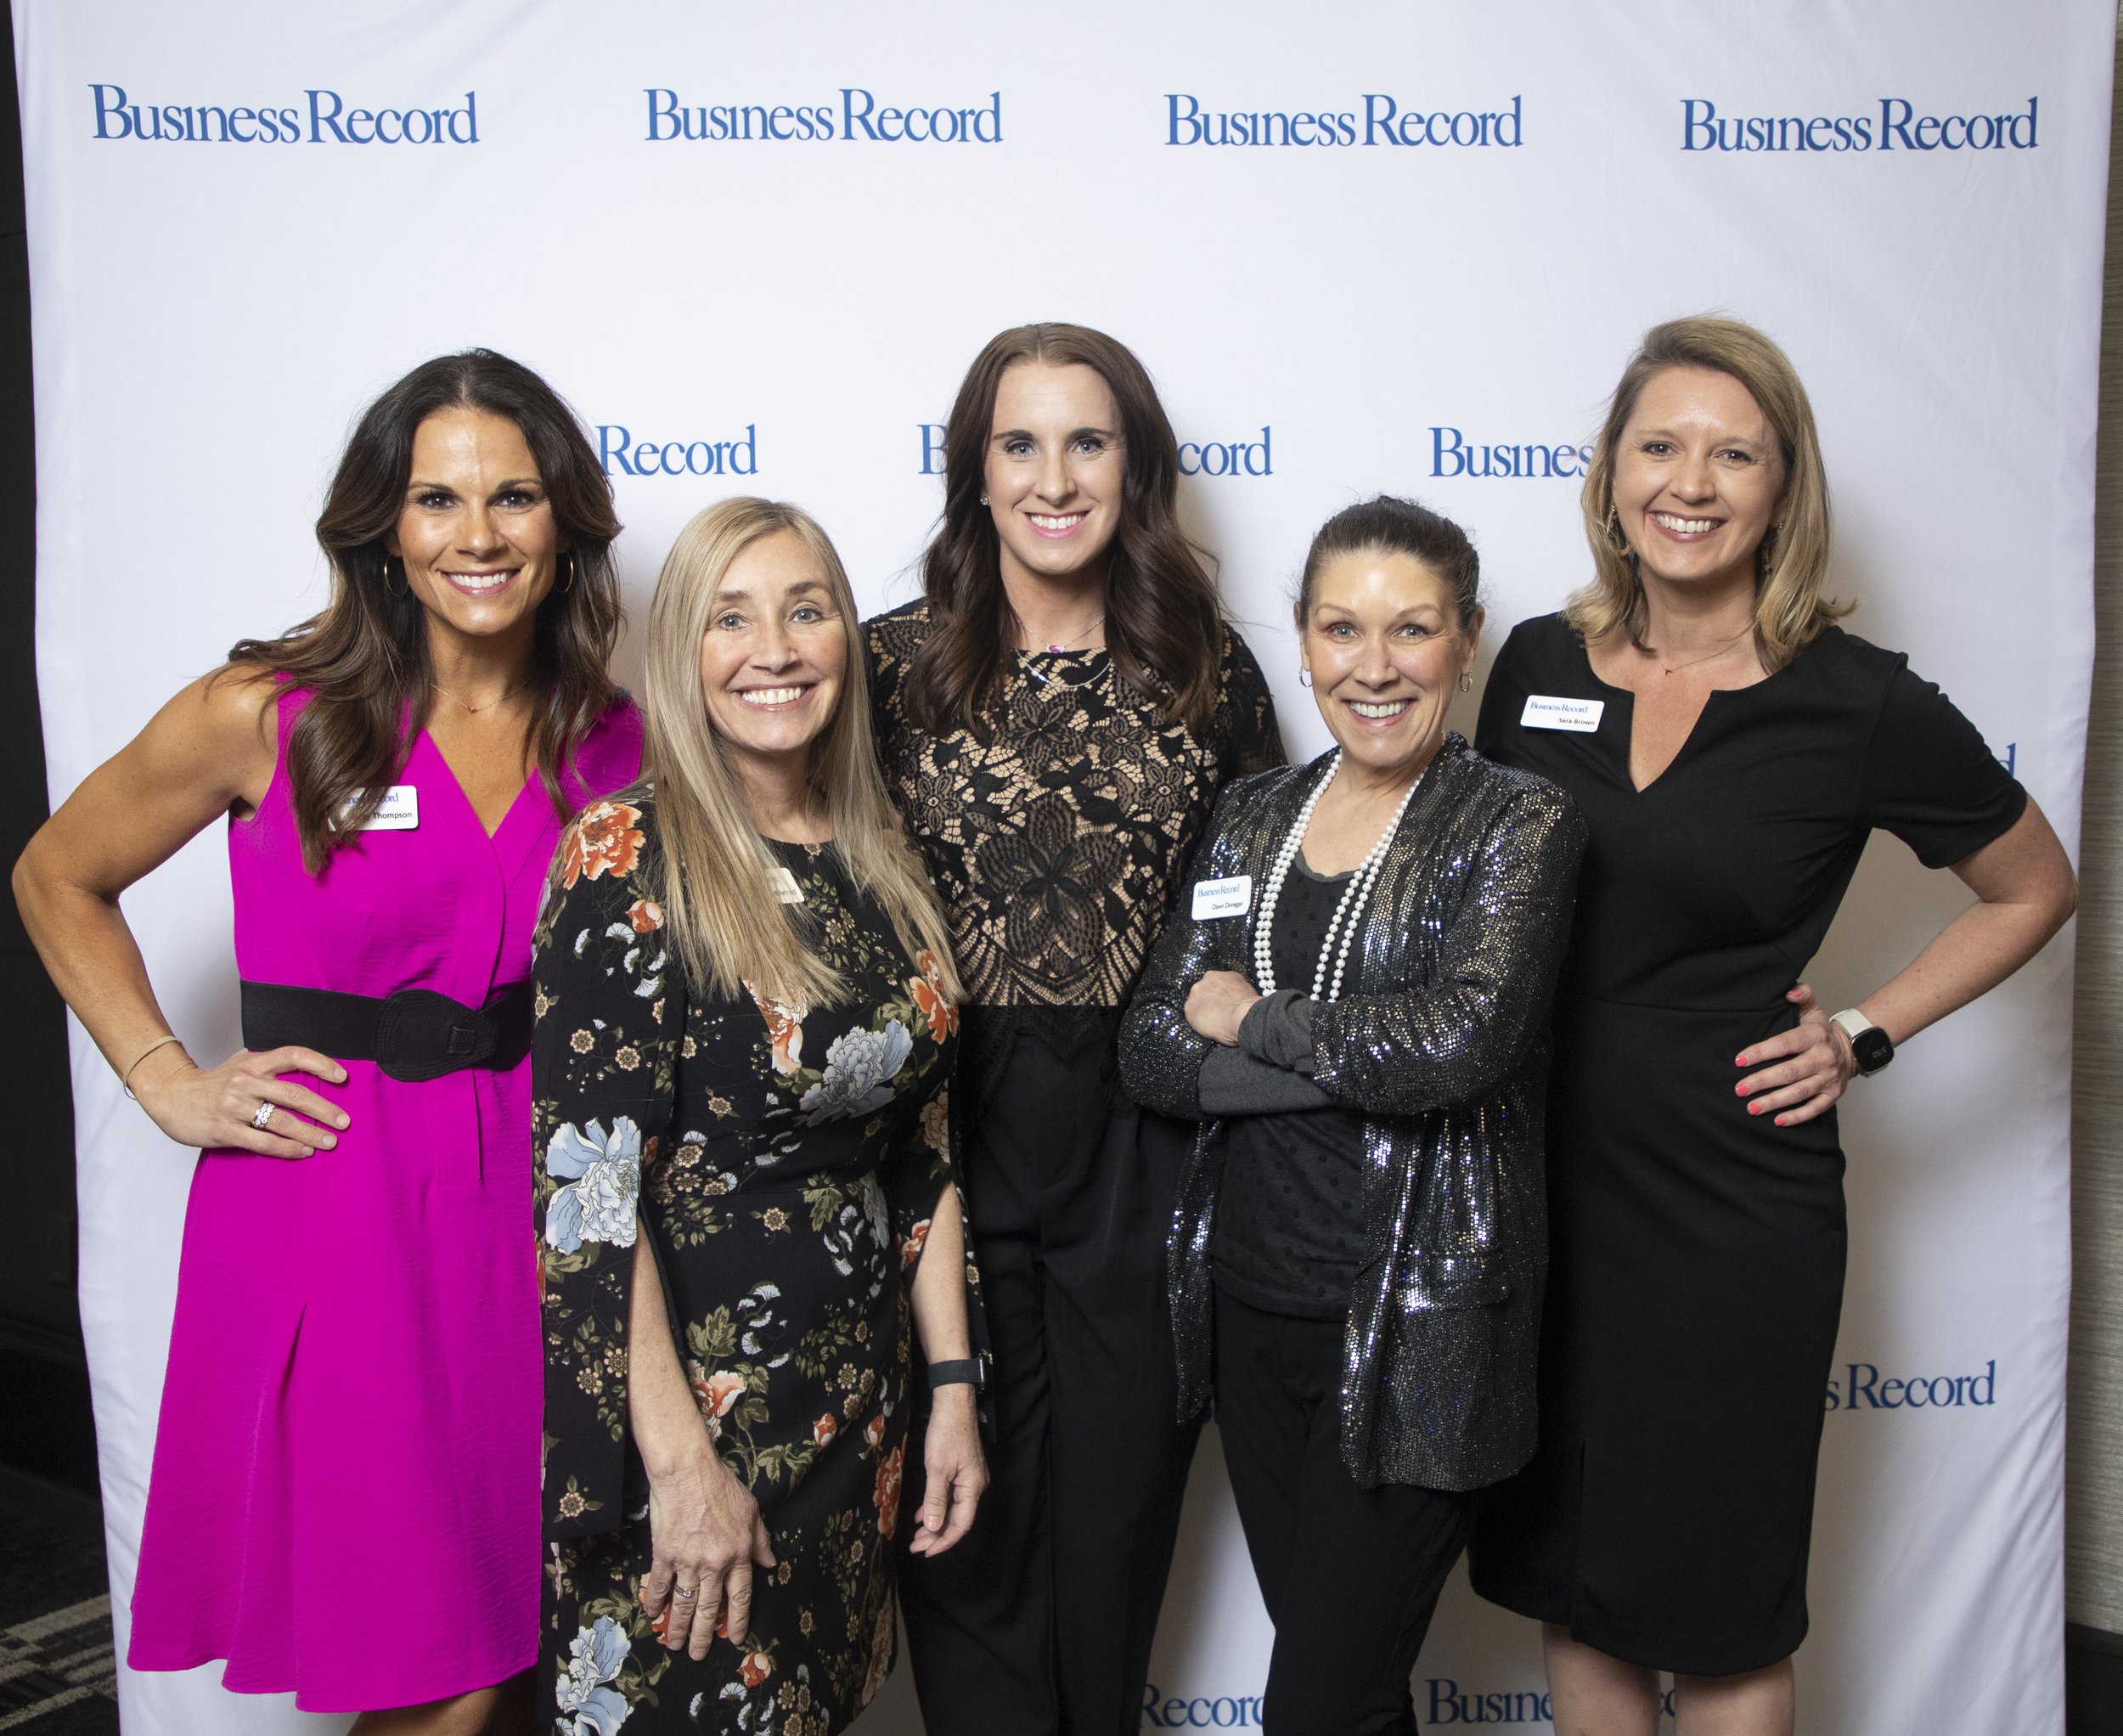  The Business Record sales and events team 